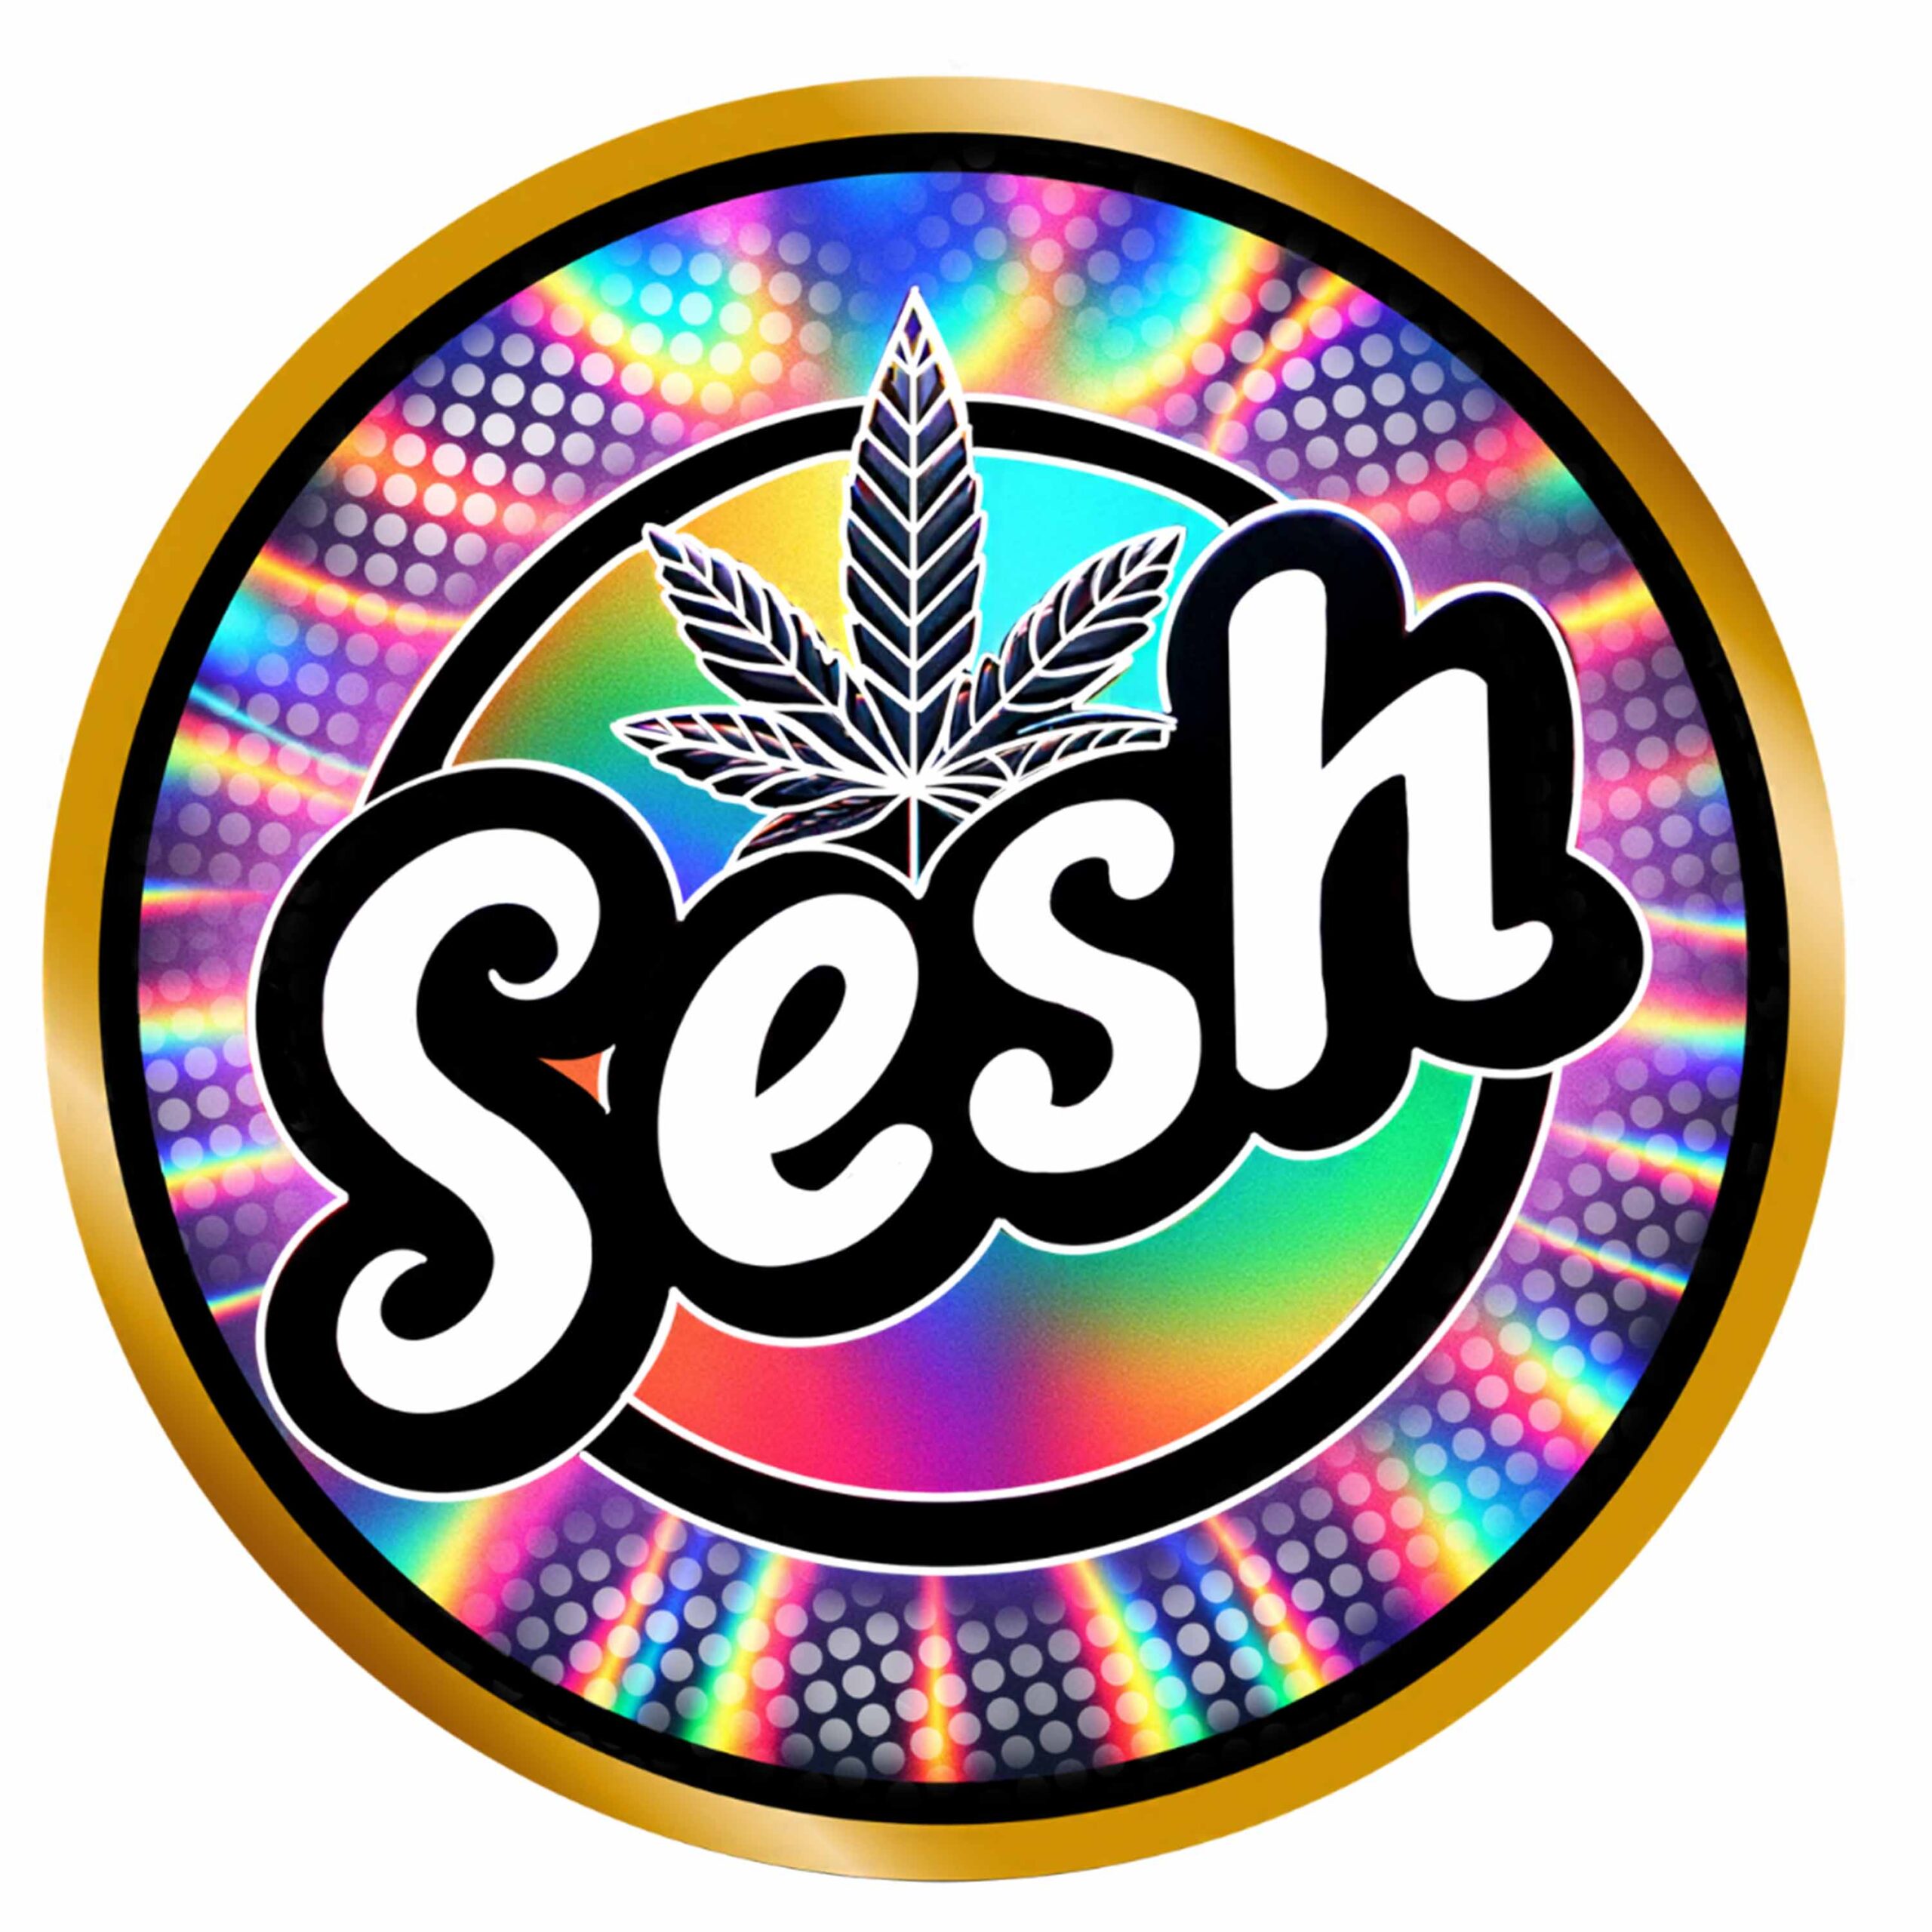 Featured image for “Sesh Live Rosin”